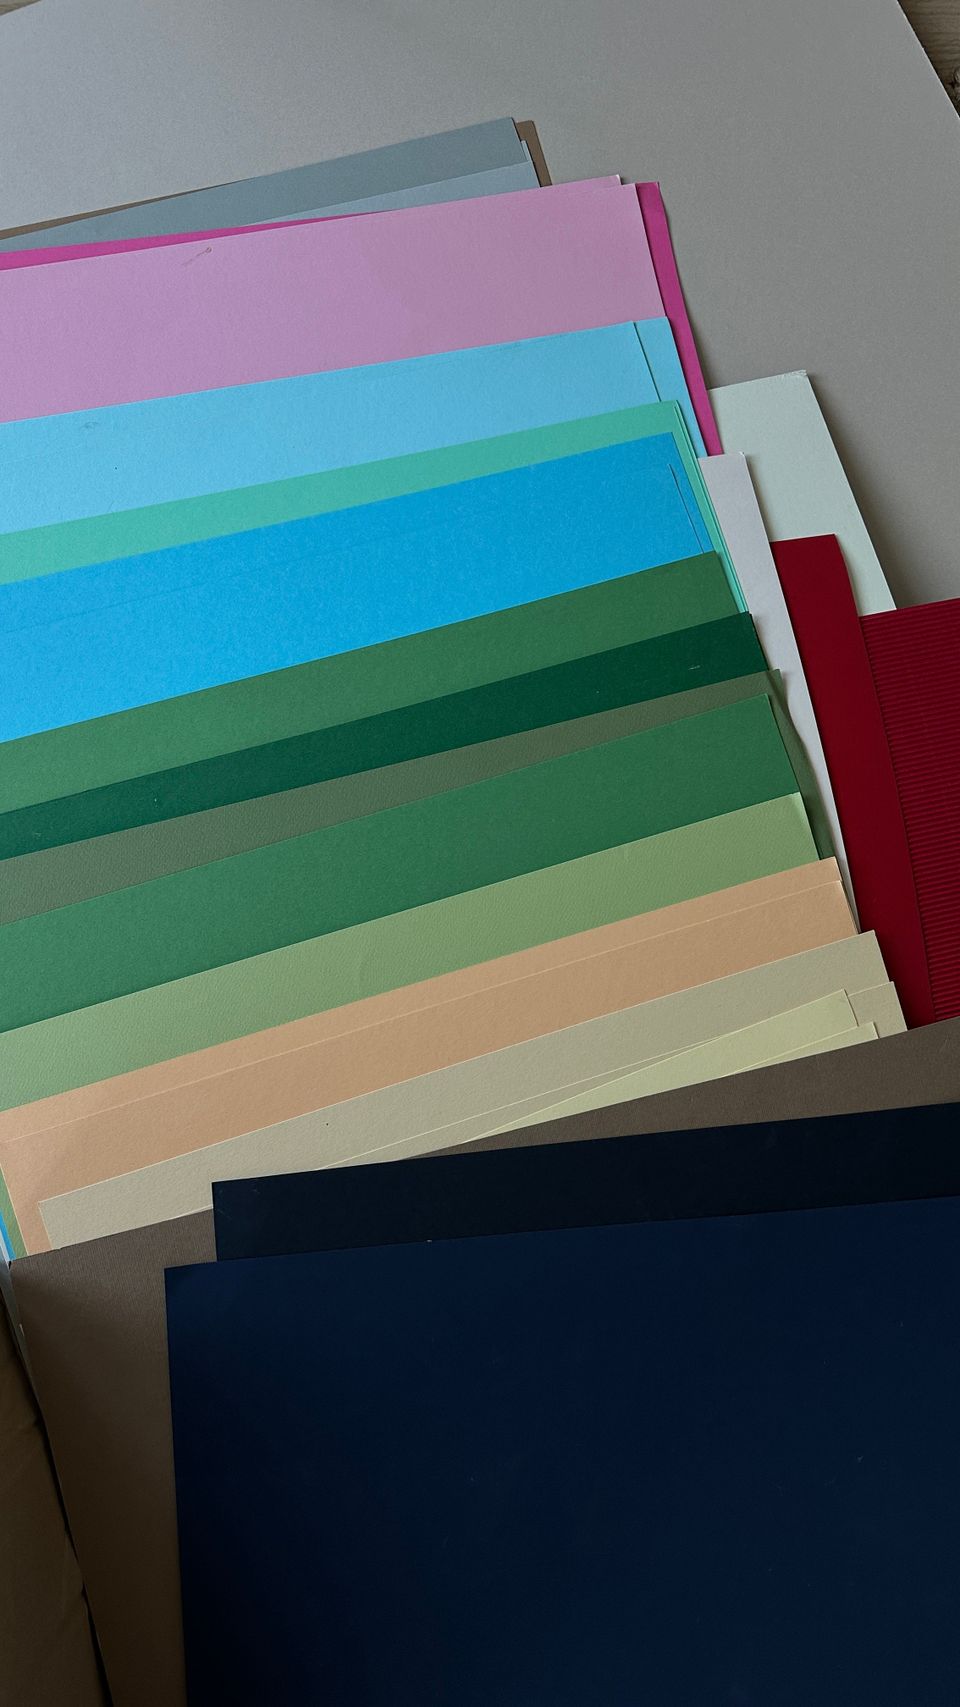 Paper in different colors